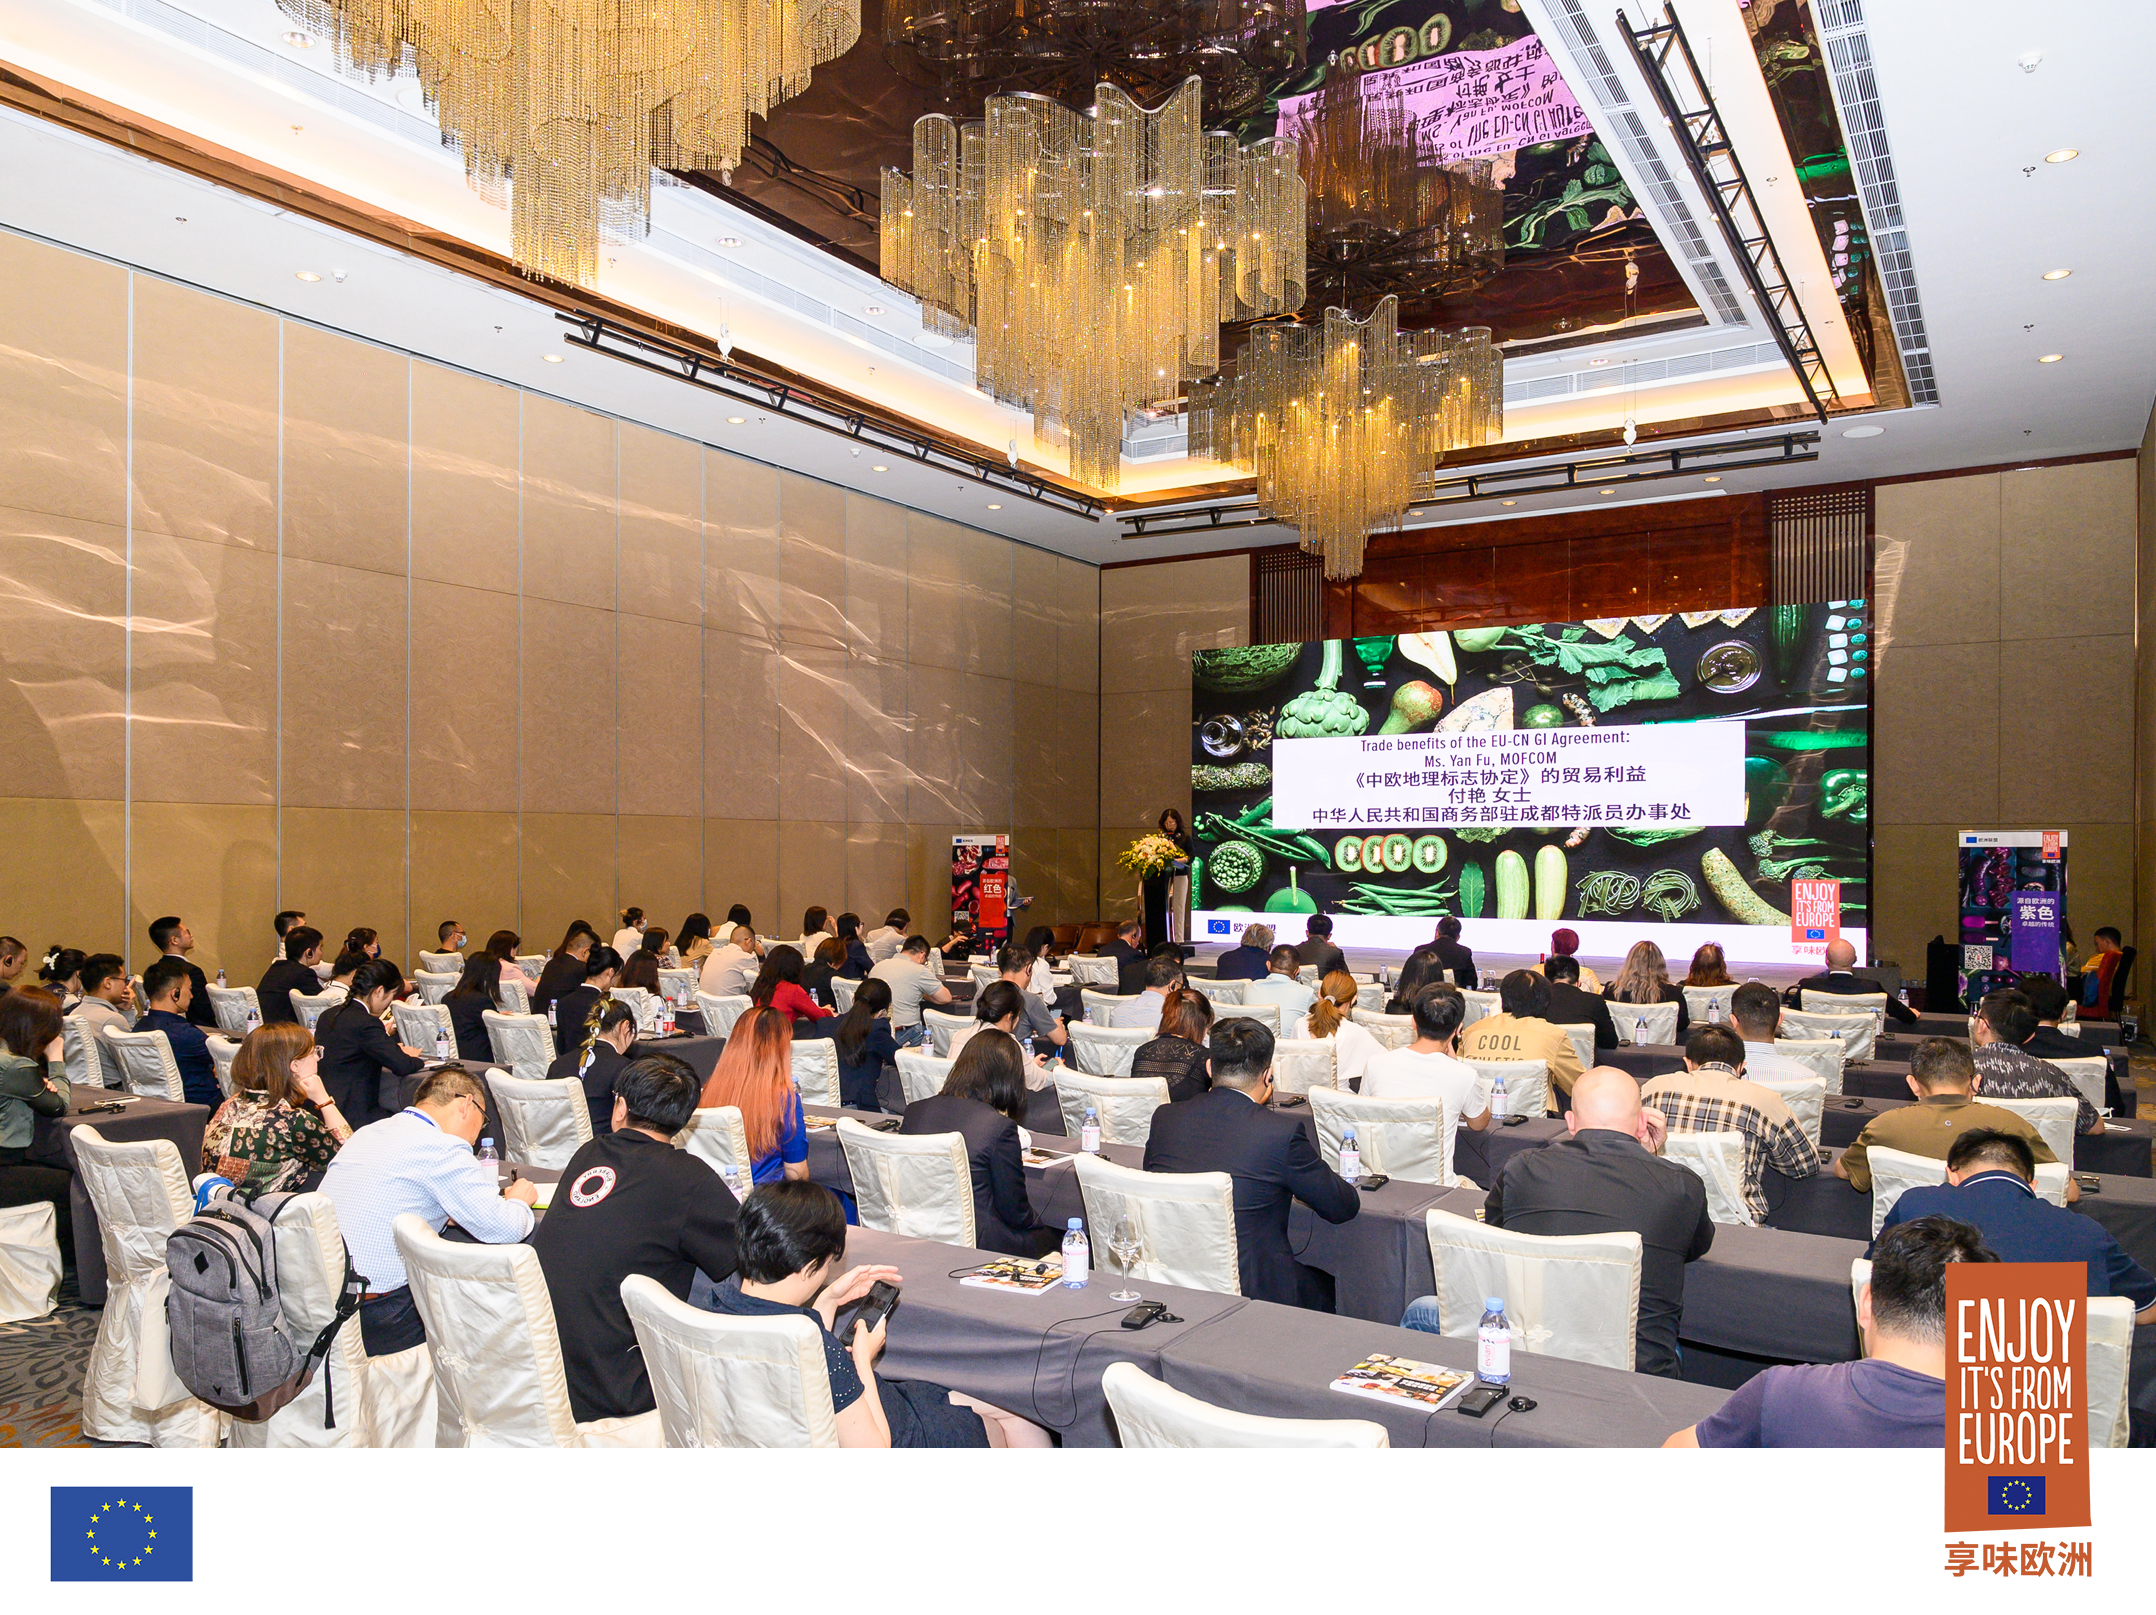 Room filled with participants at GI conference in Chengdu 